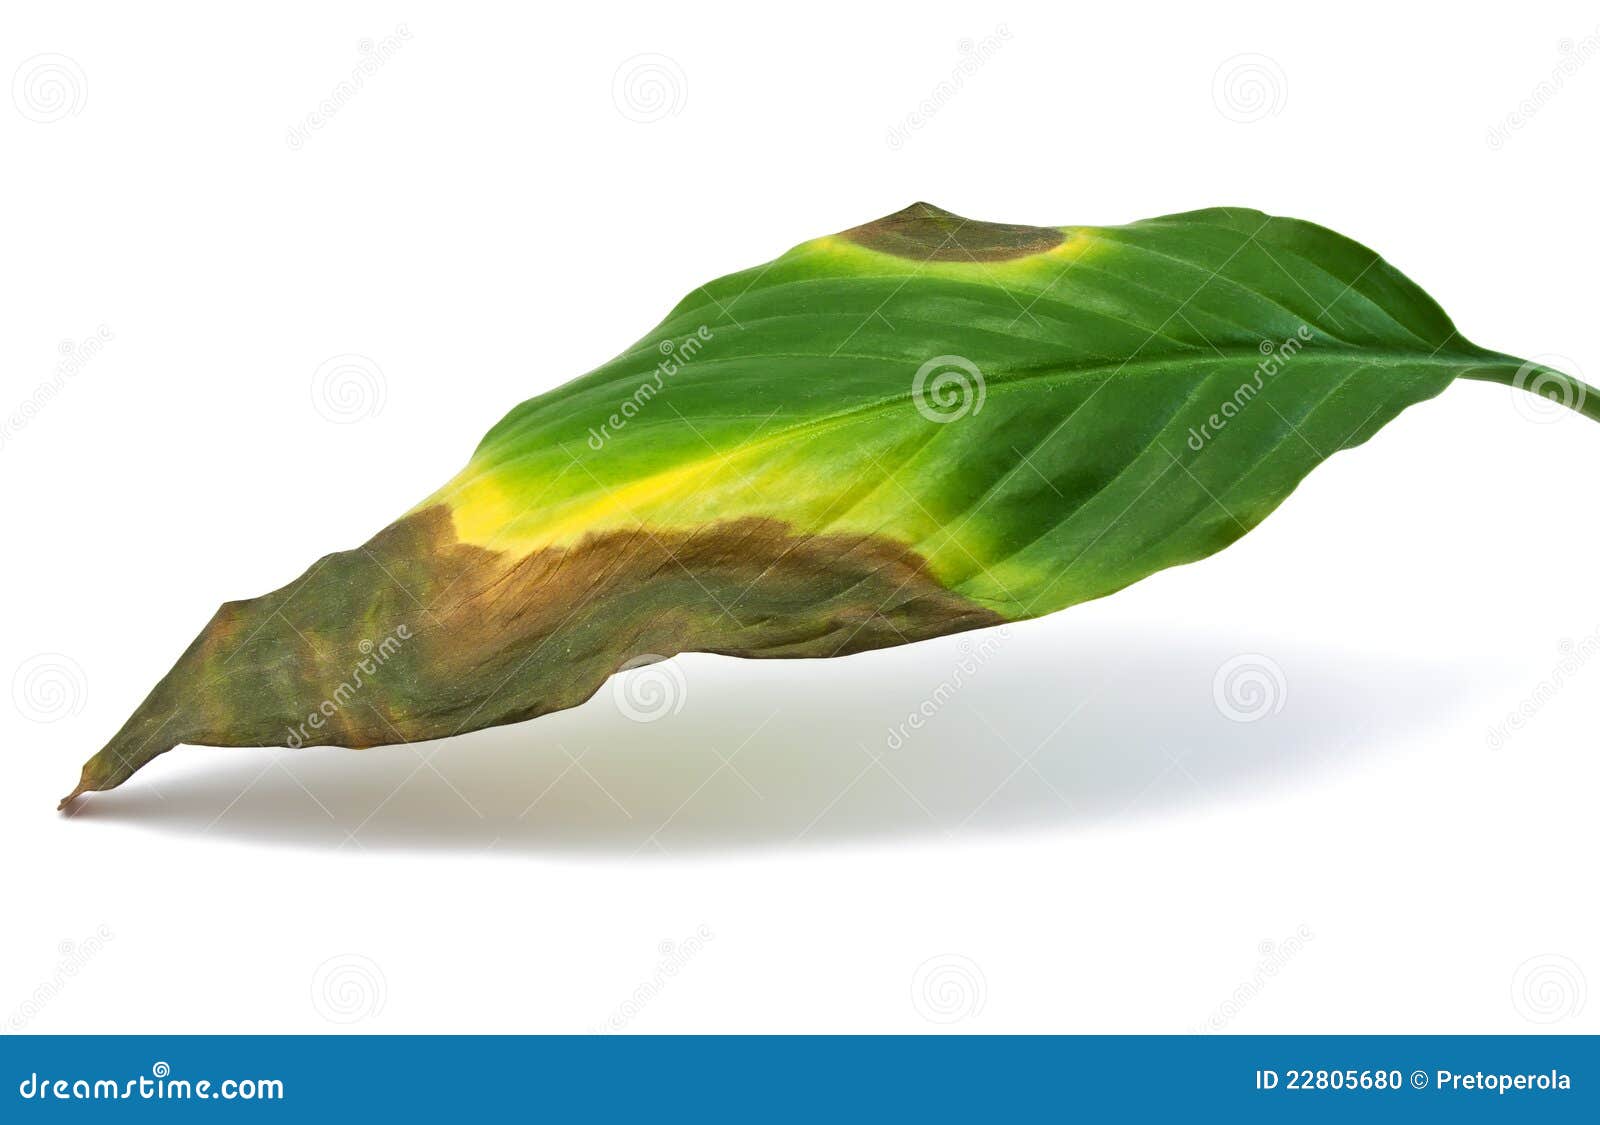 dying and rotting leaf